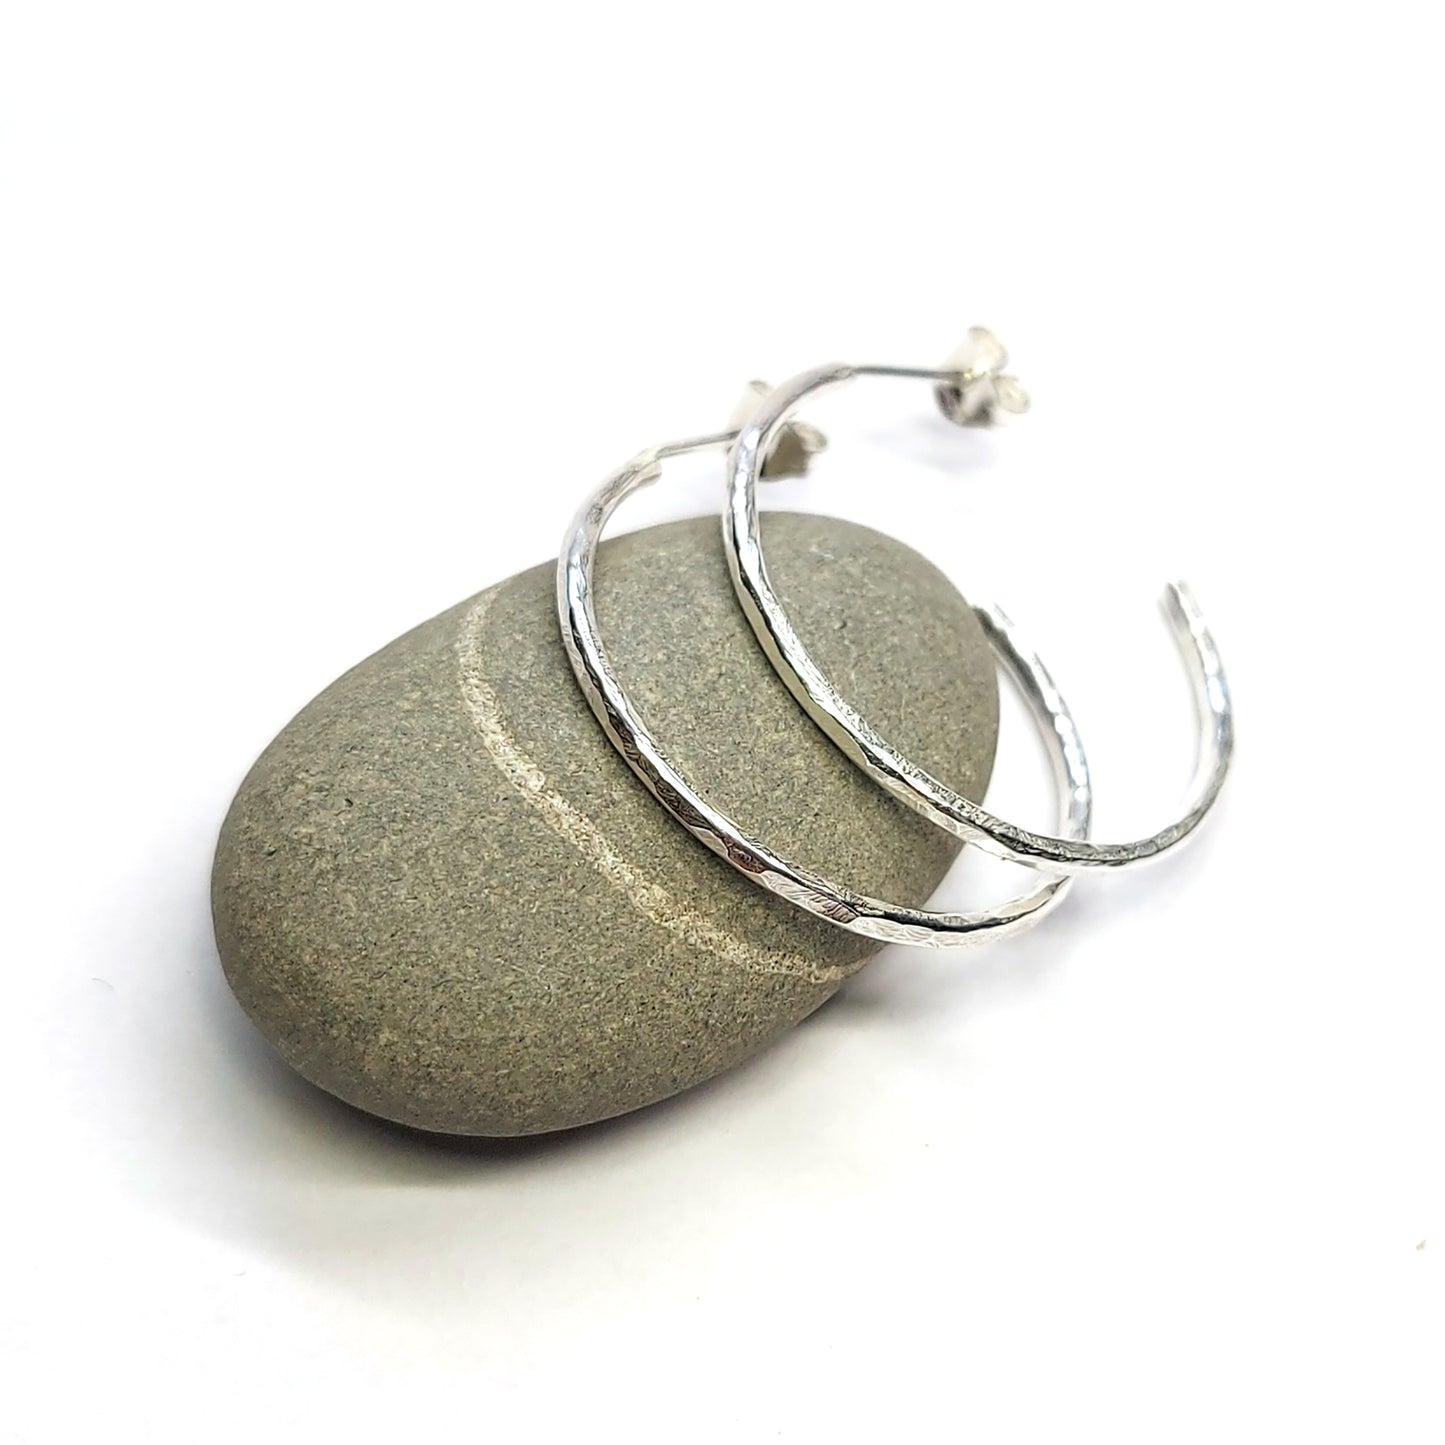 Silver thin hammered hoop earrings - medium. Shown pictured on a pebble.